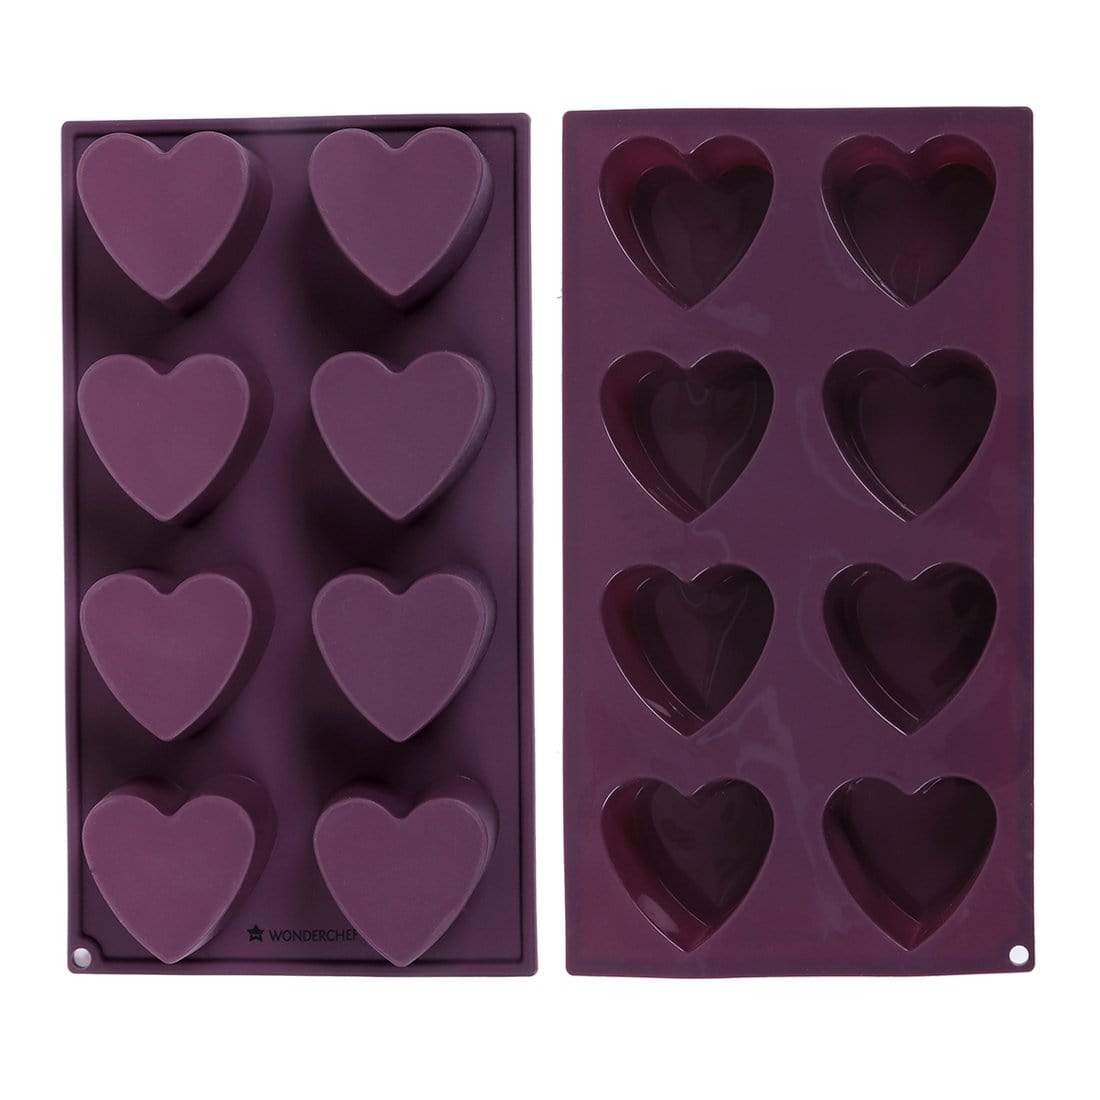 Amore Heart Silicone Mold w/ Cutter